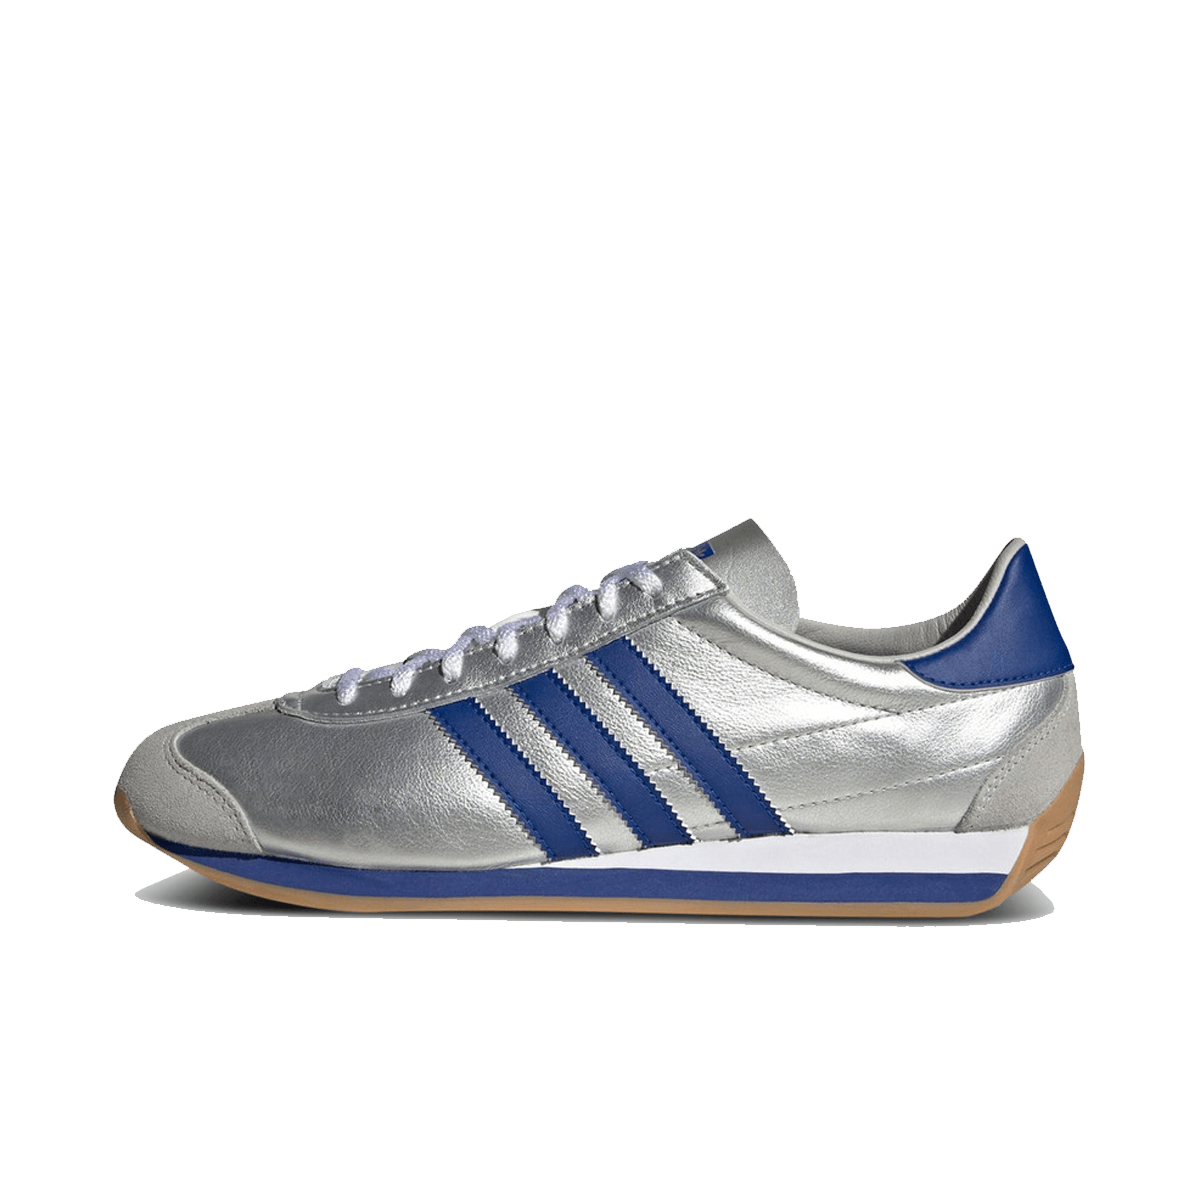 adidas Country OG 'Matte Silver' IE4230